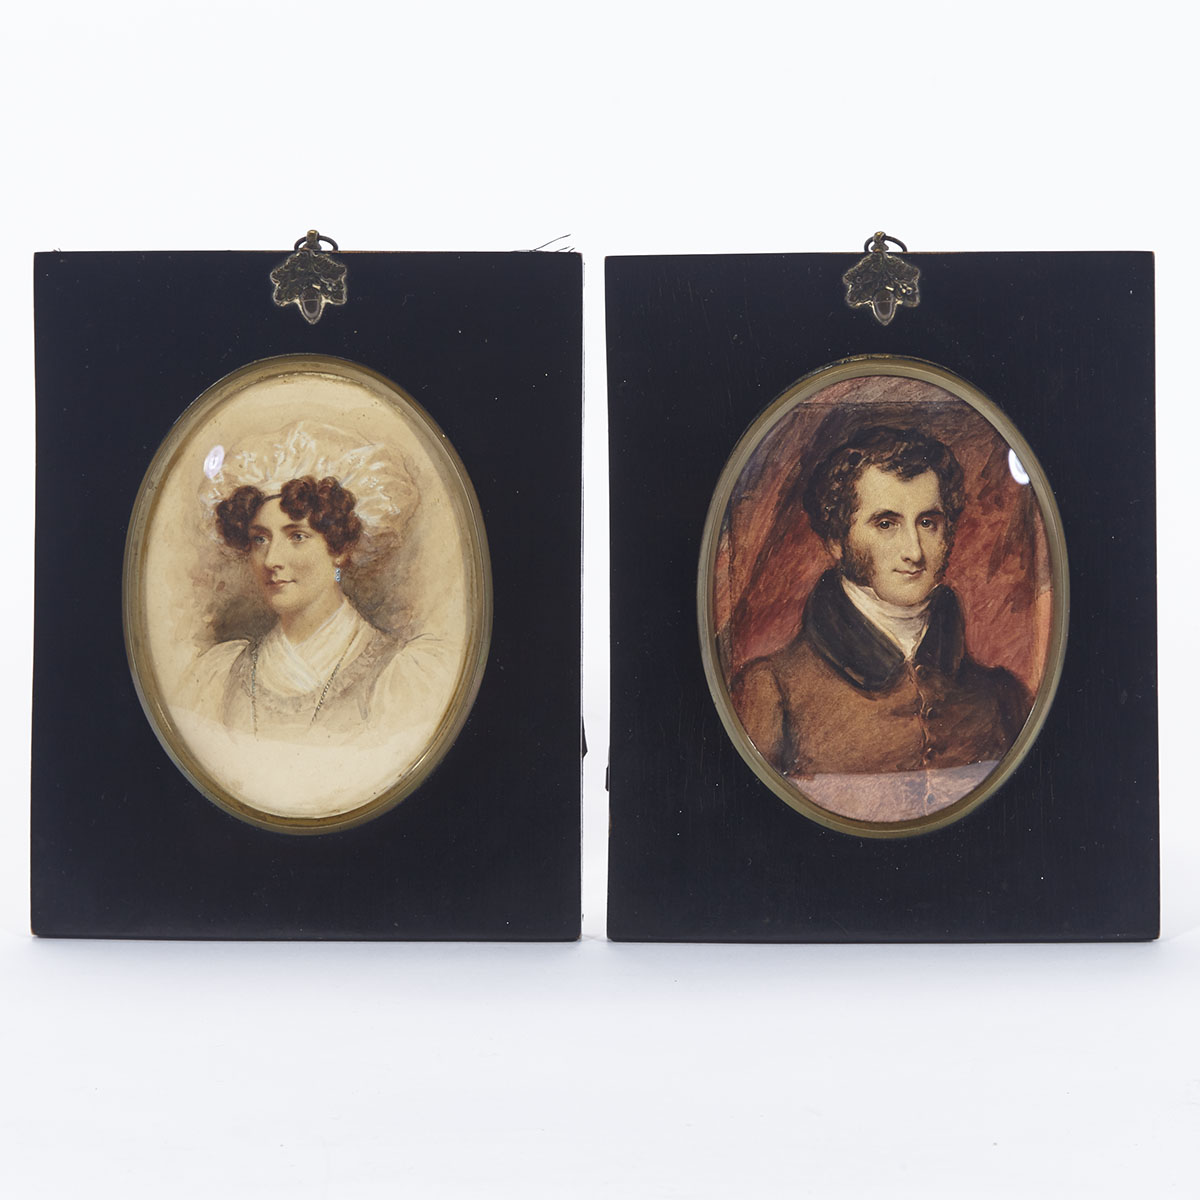 Pair of Canadian School Portrait Miniatures of Pierre-Jean de Sales Laterrière and His Wife Mary Anne Bulmer, early 19th century